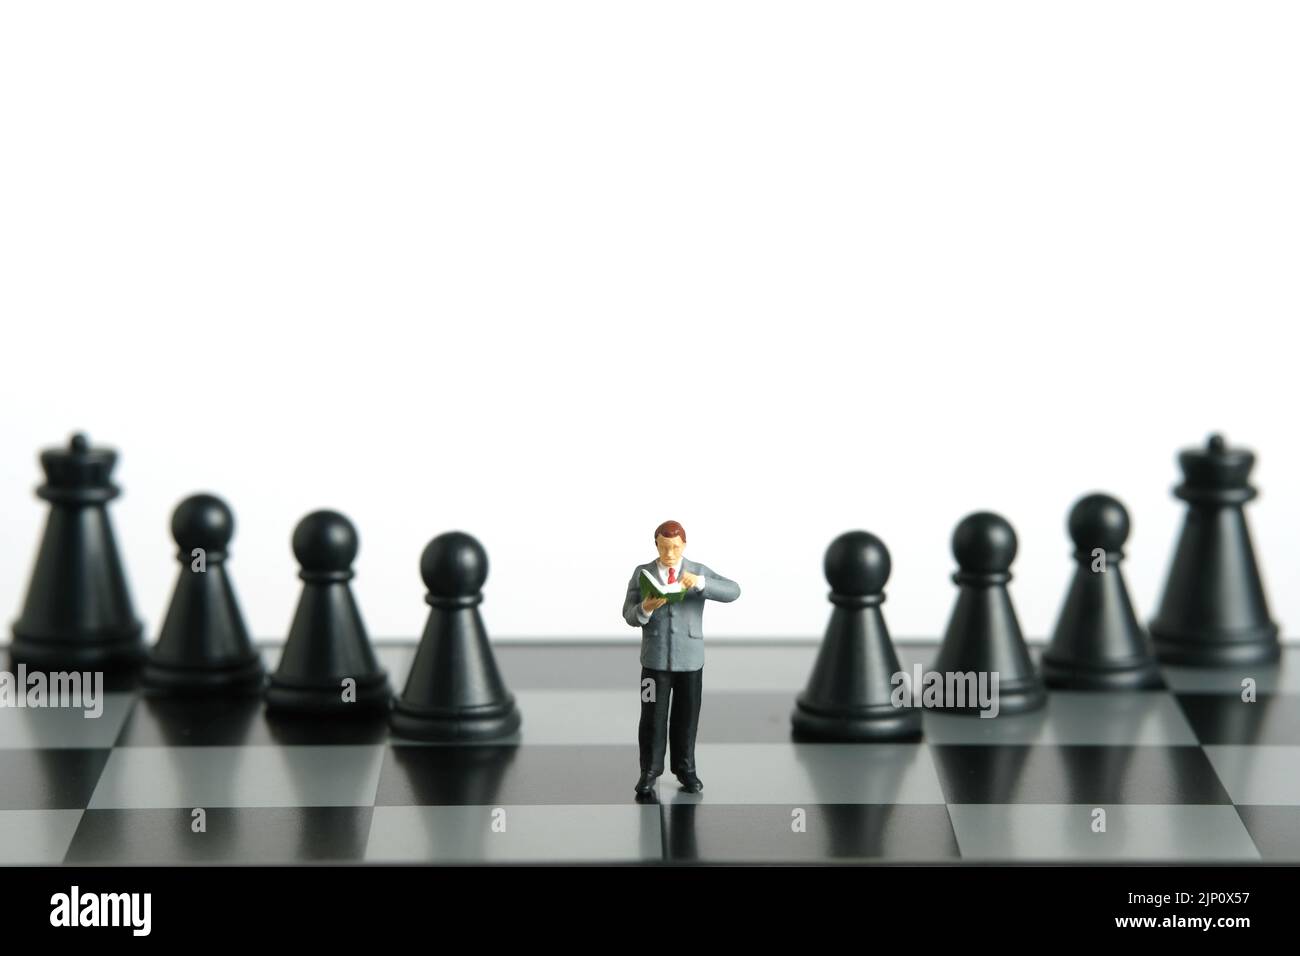 Miniature people toy figure photography. A men student standing above chessboard with pawn and knight, isolated on white background. Image photo Stock Photo